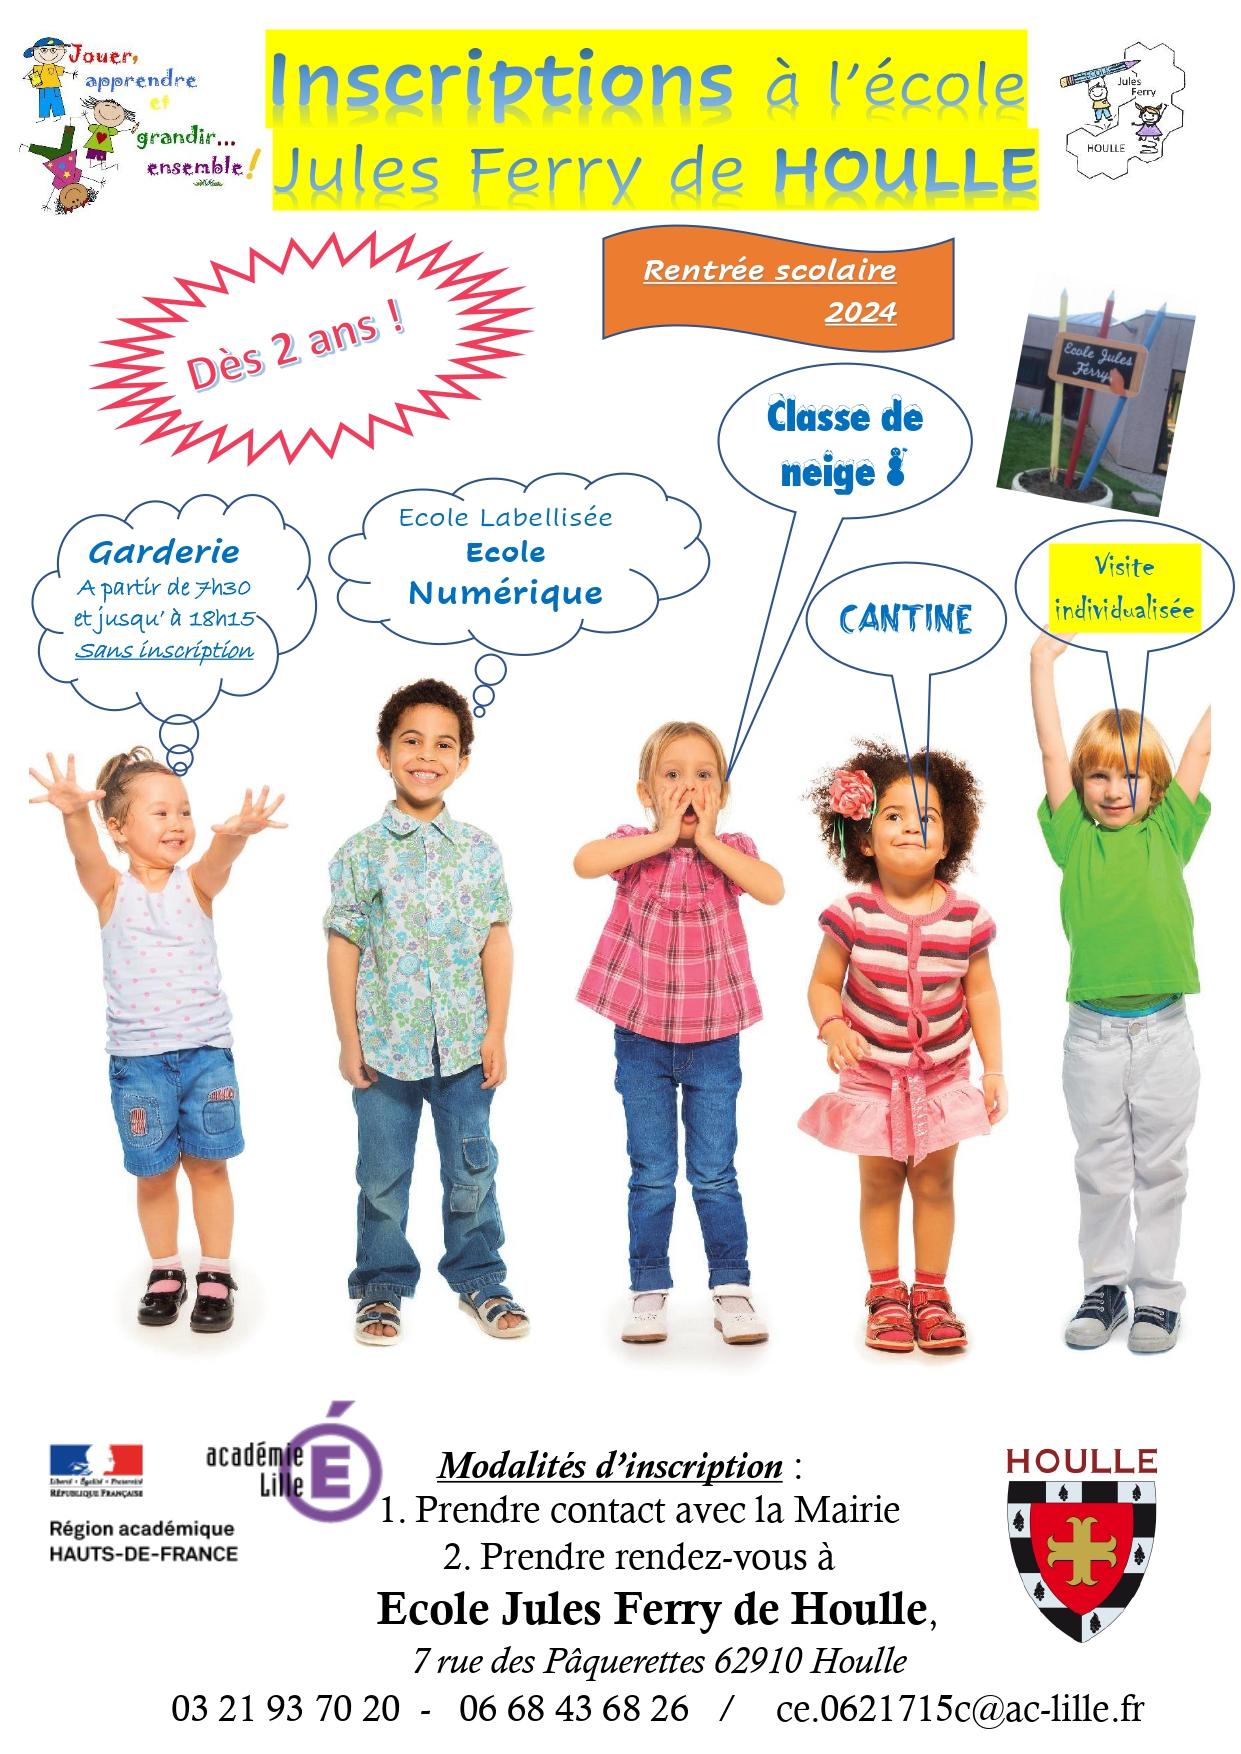 Inscriptions ecole houlle